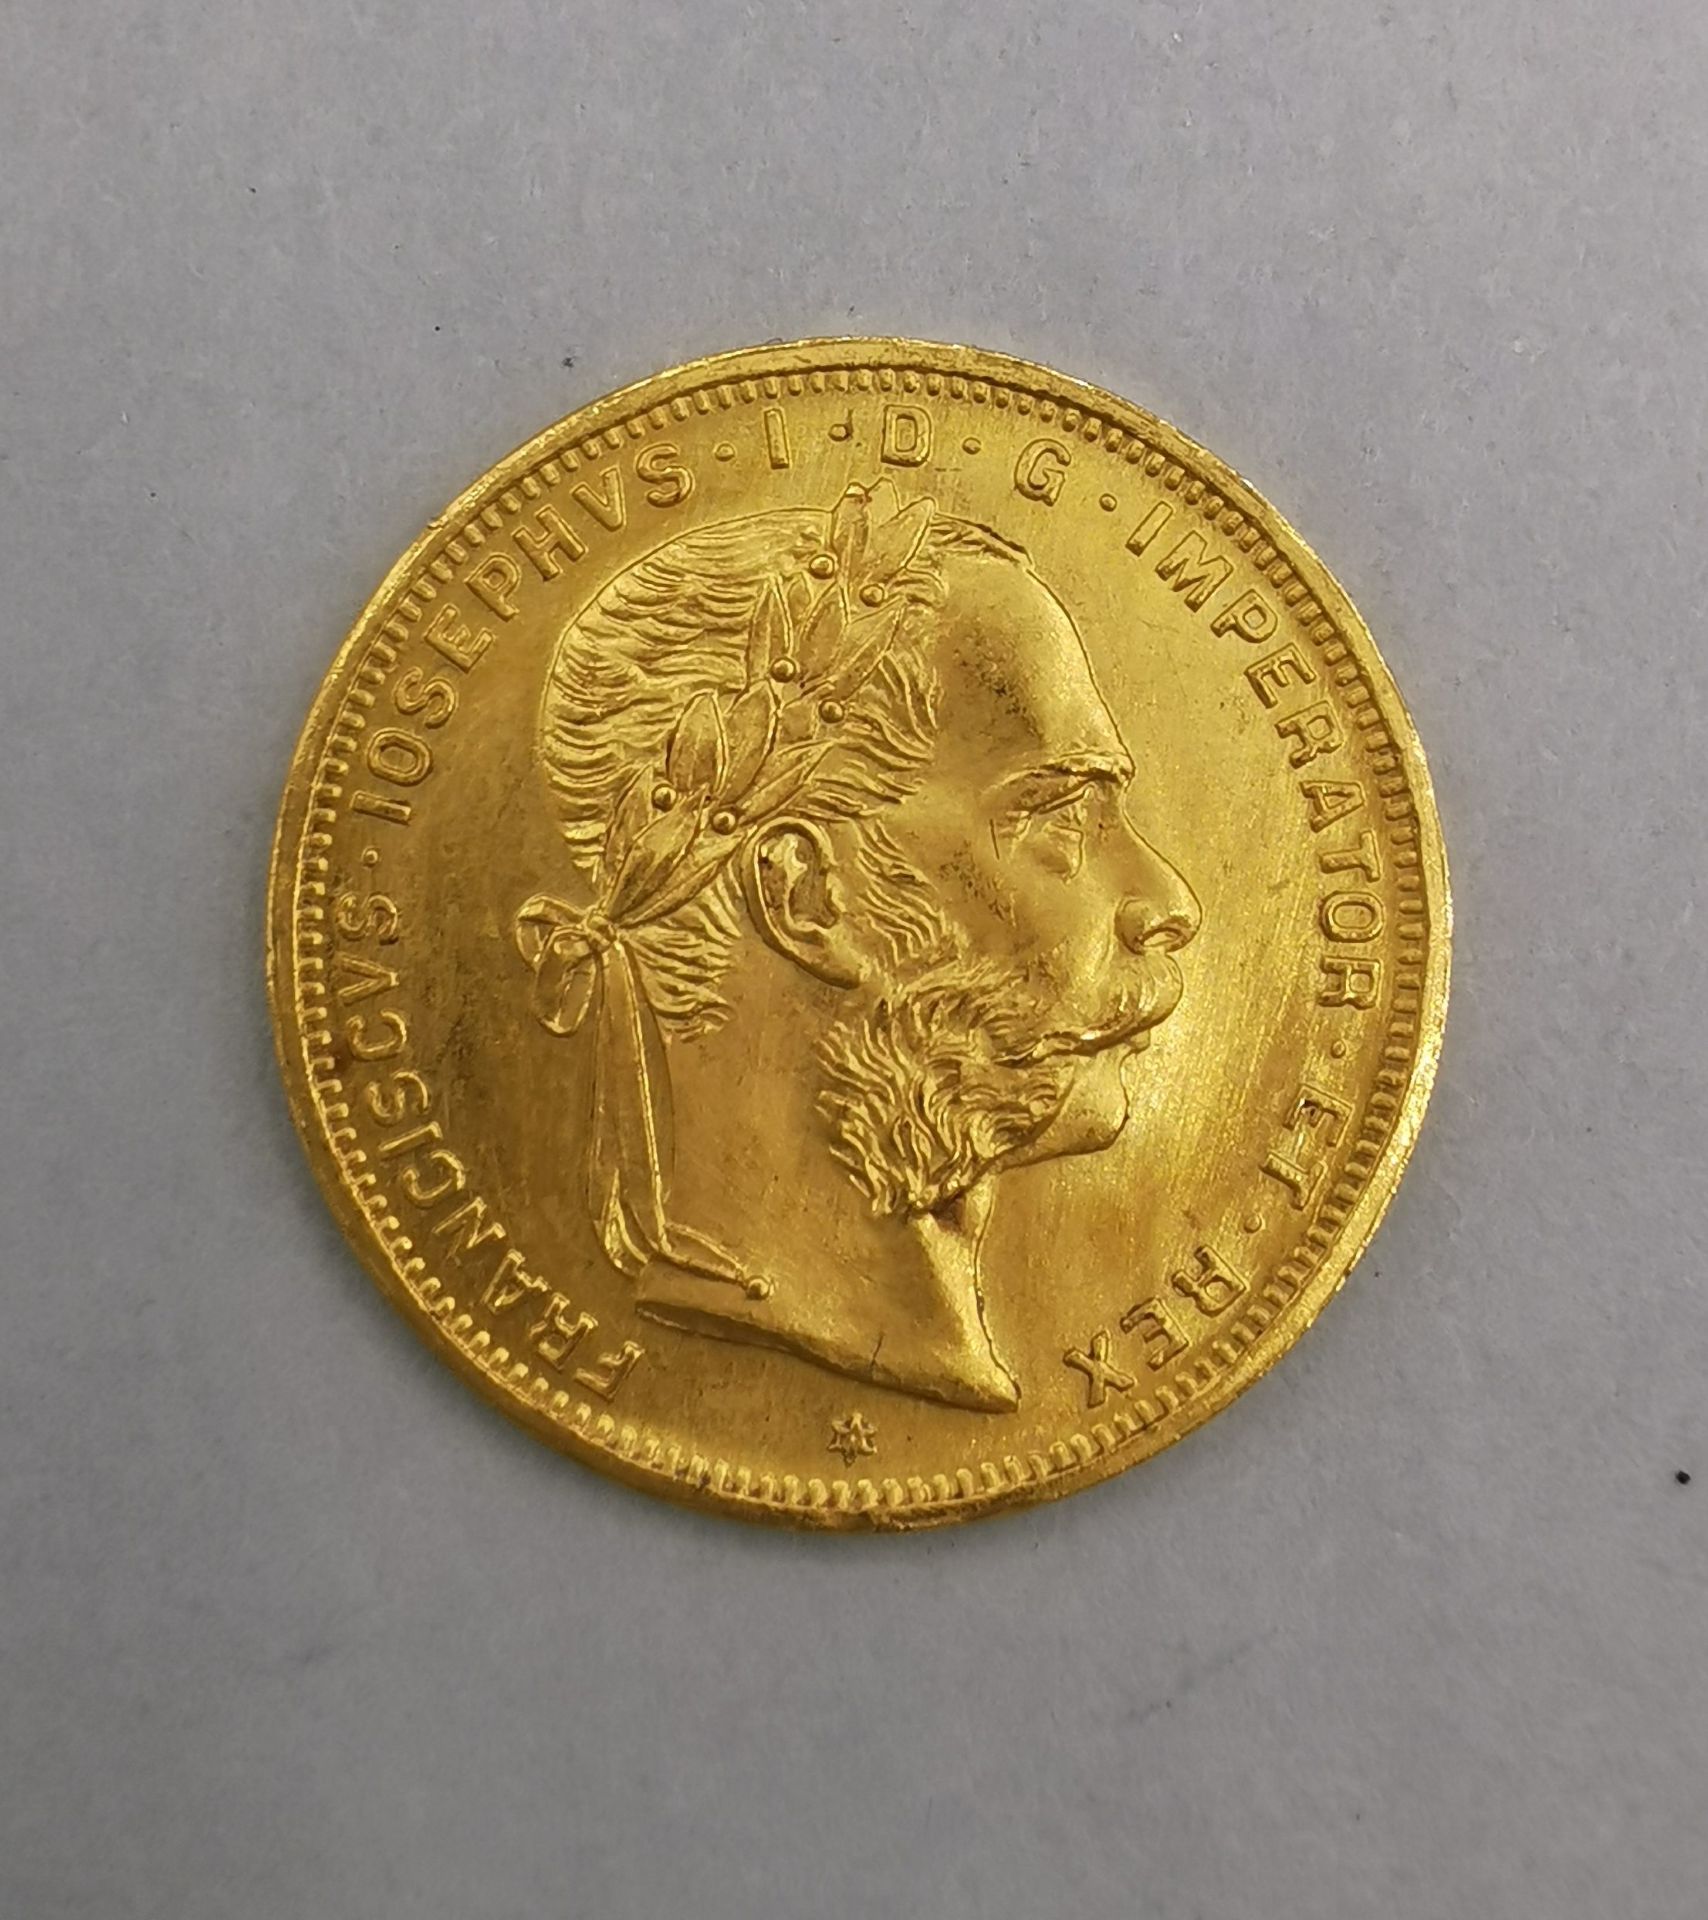 GOLD COIN - 8 FLORIN - 20 FRANKS - Image 2 of 2